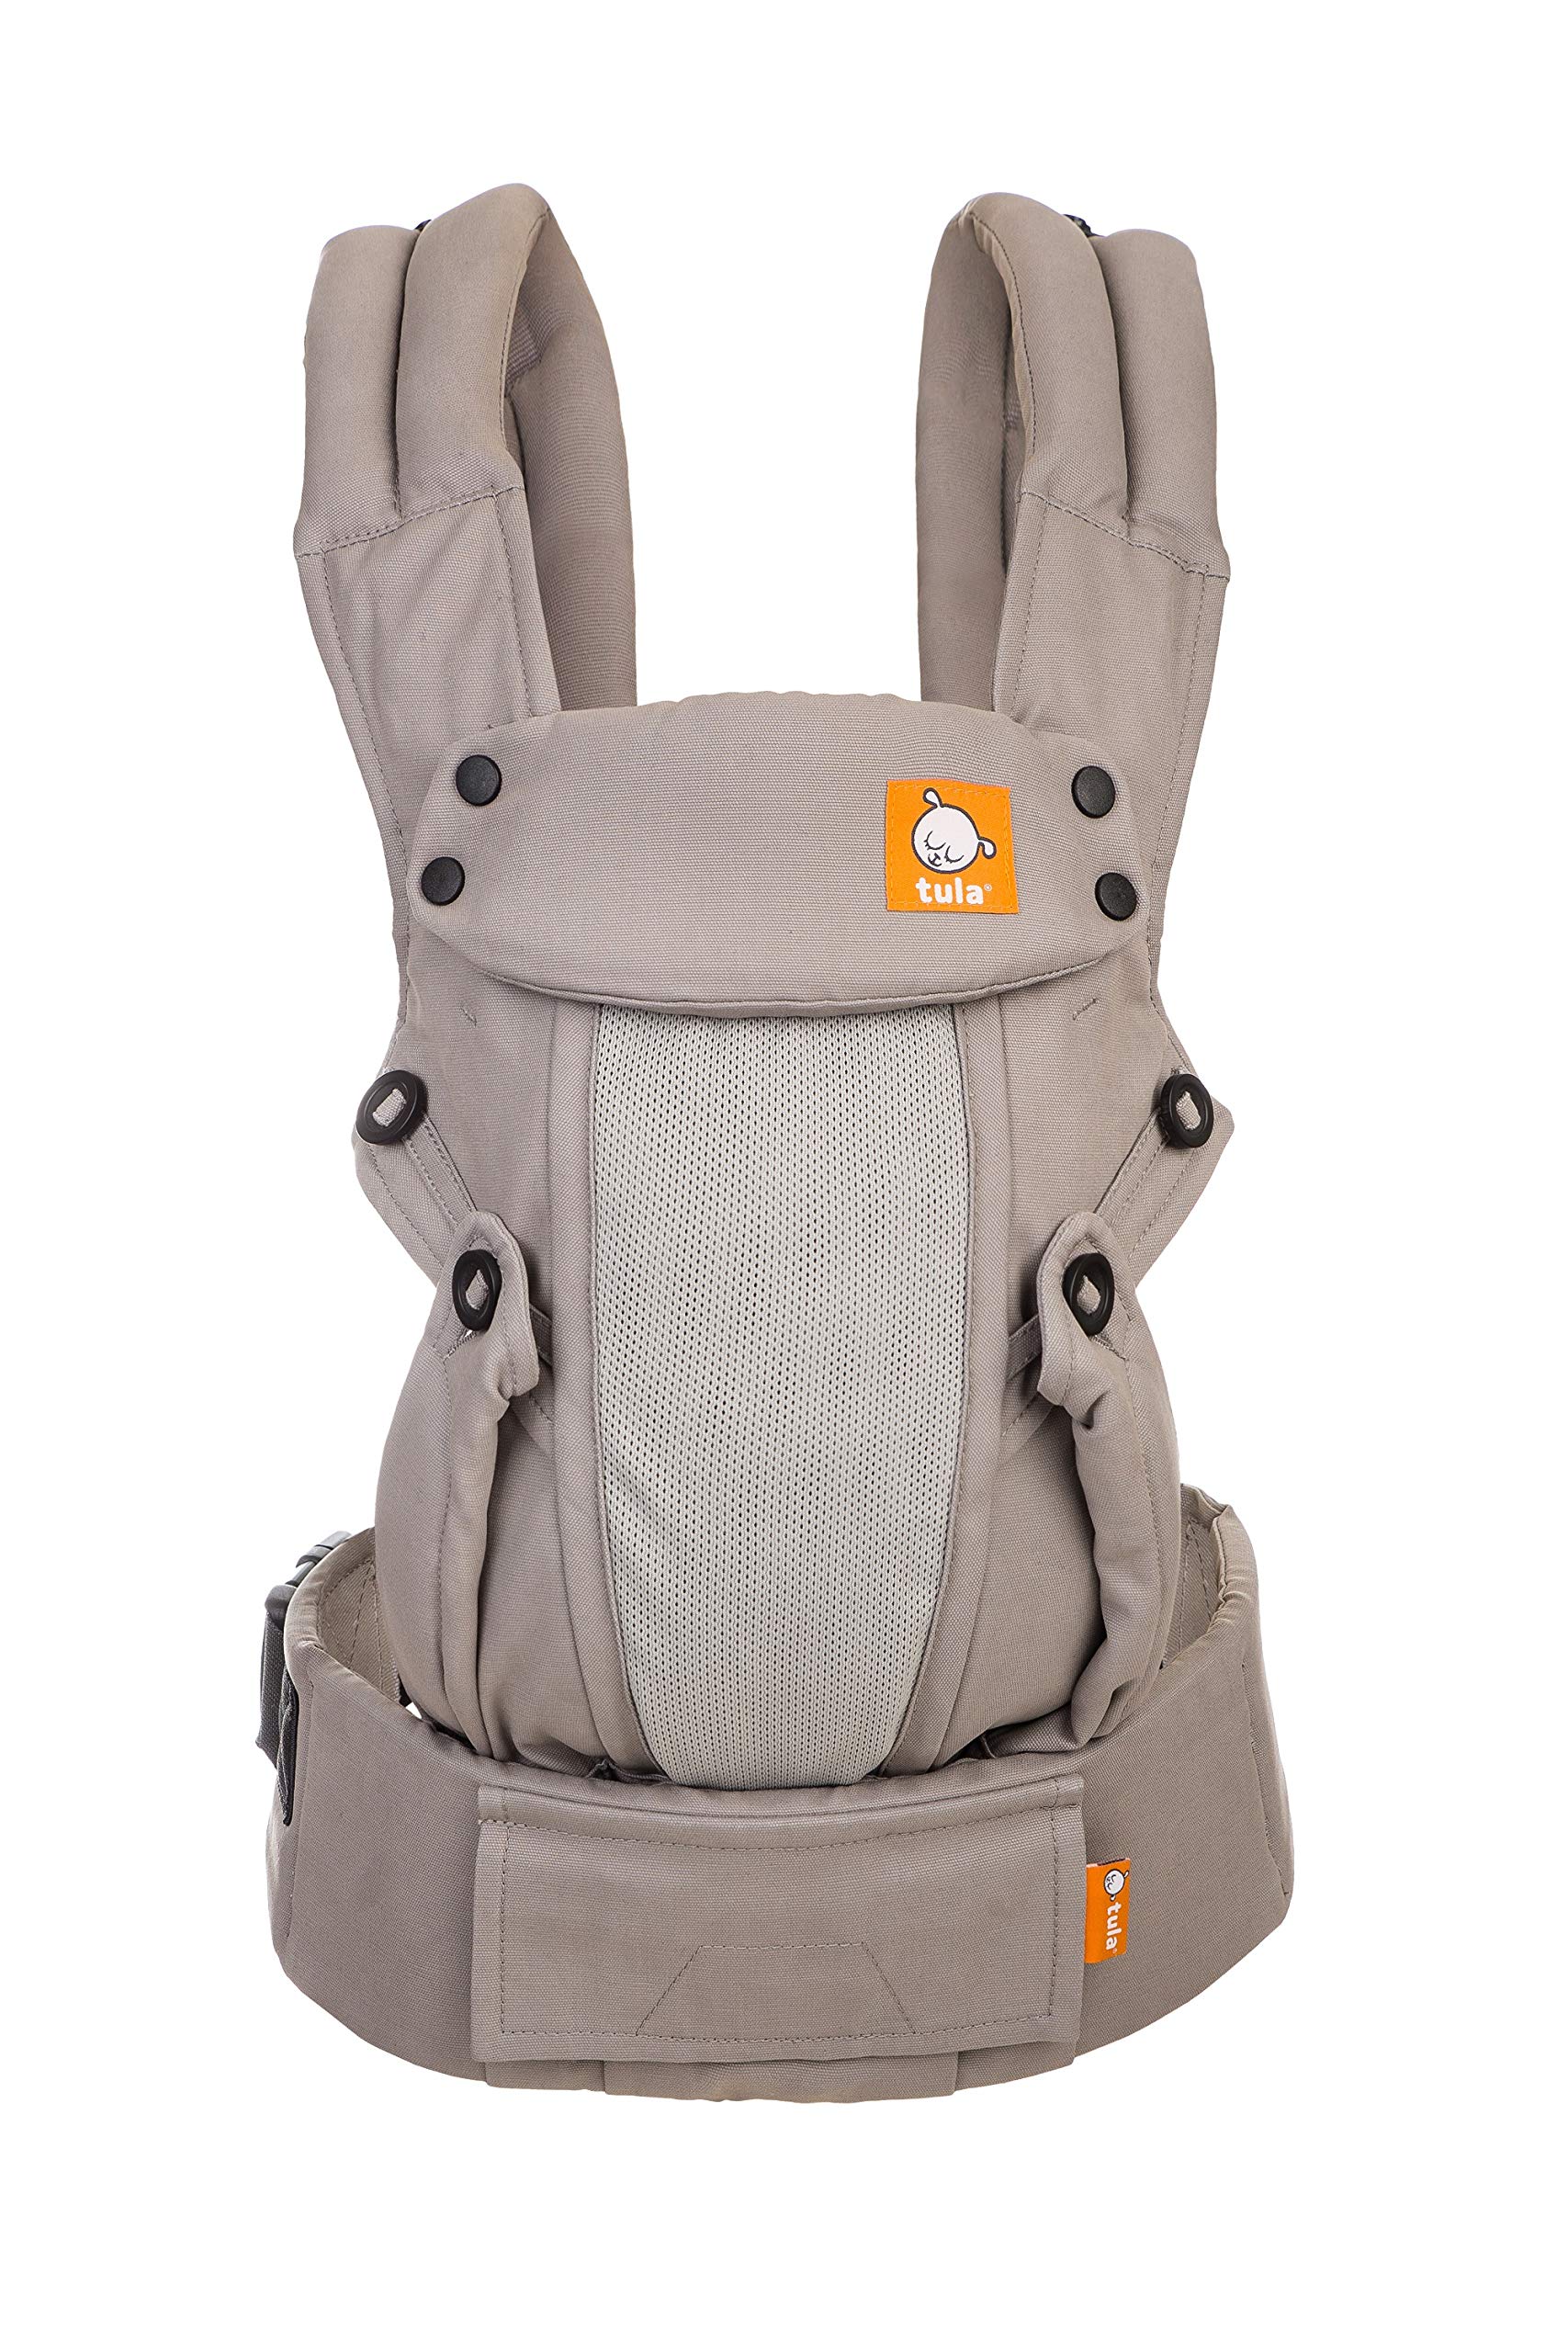 Baby Tula Coast Explore Mesh Baby Carrier 7 – 45 lb, Adjustable Newborn to Toddler Carrier, Multiple Ergonomic Positions Front and Back, Breathable – Coast Overcast, Light Gray with Light Gray Mesh